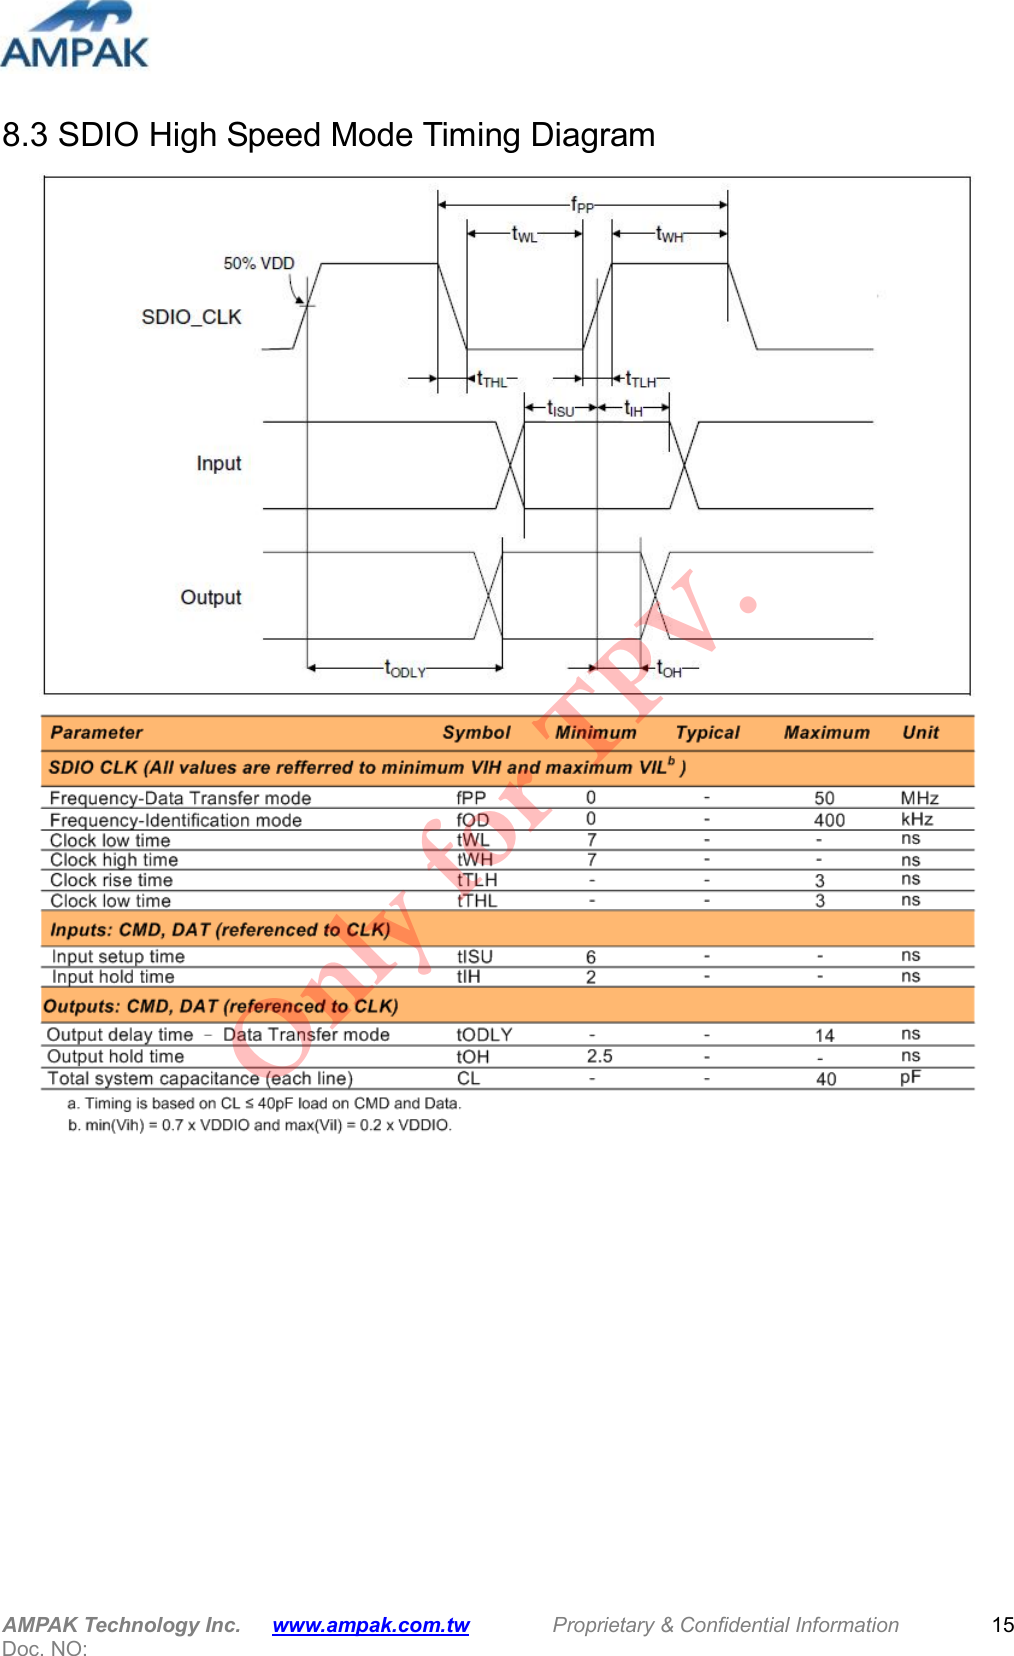  AMPAK Technology Inc.      www.ampak.com.tw        Proprietary &amp; Confidential Information       Doc. NO:   15 8.3 SDIO High Speed Mode Timing Diagram        Only for TPV.